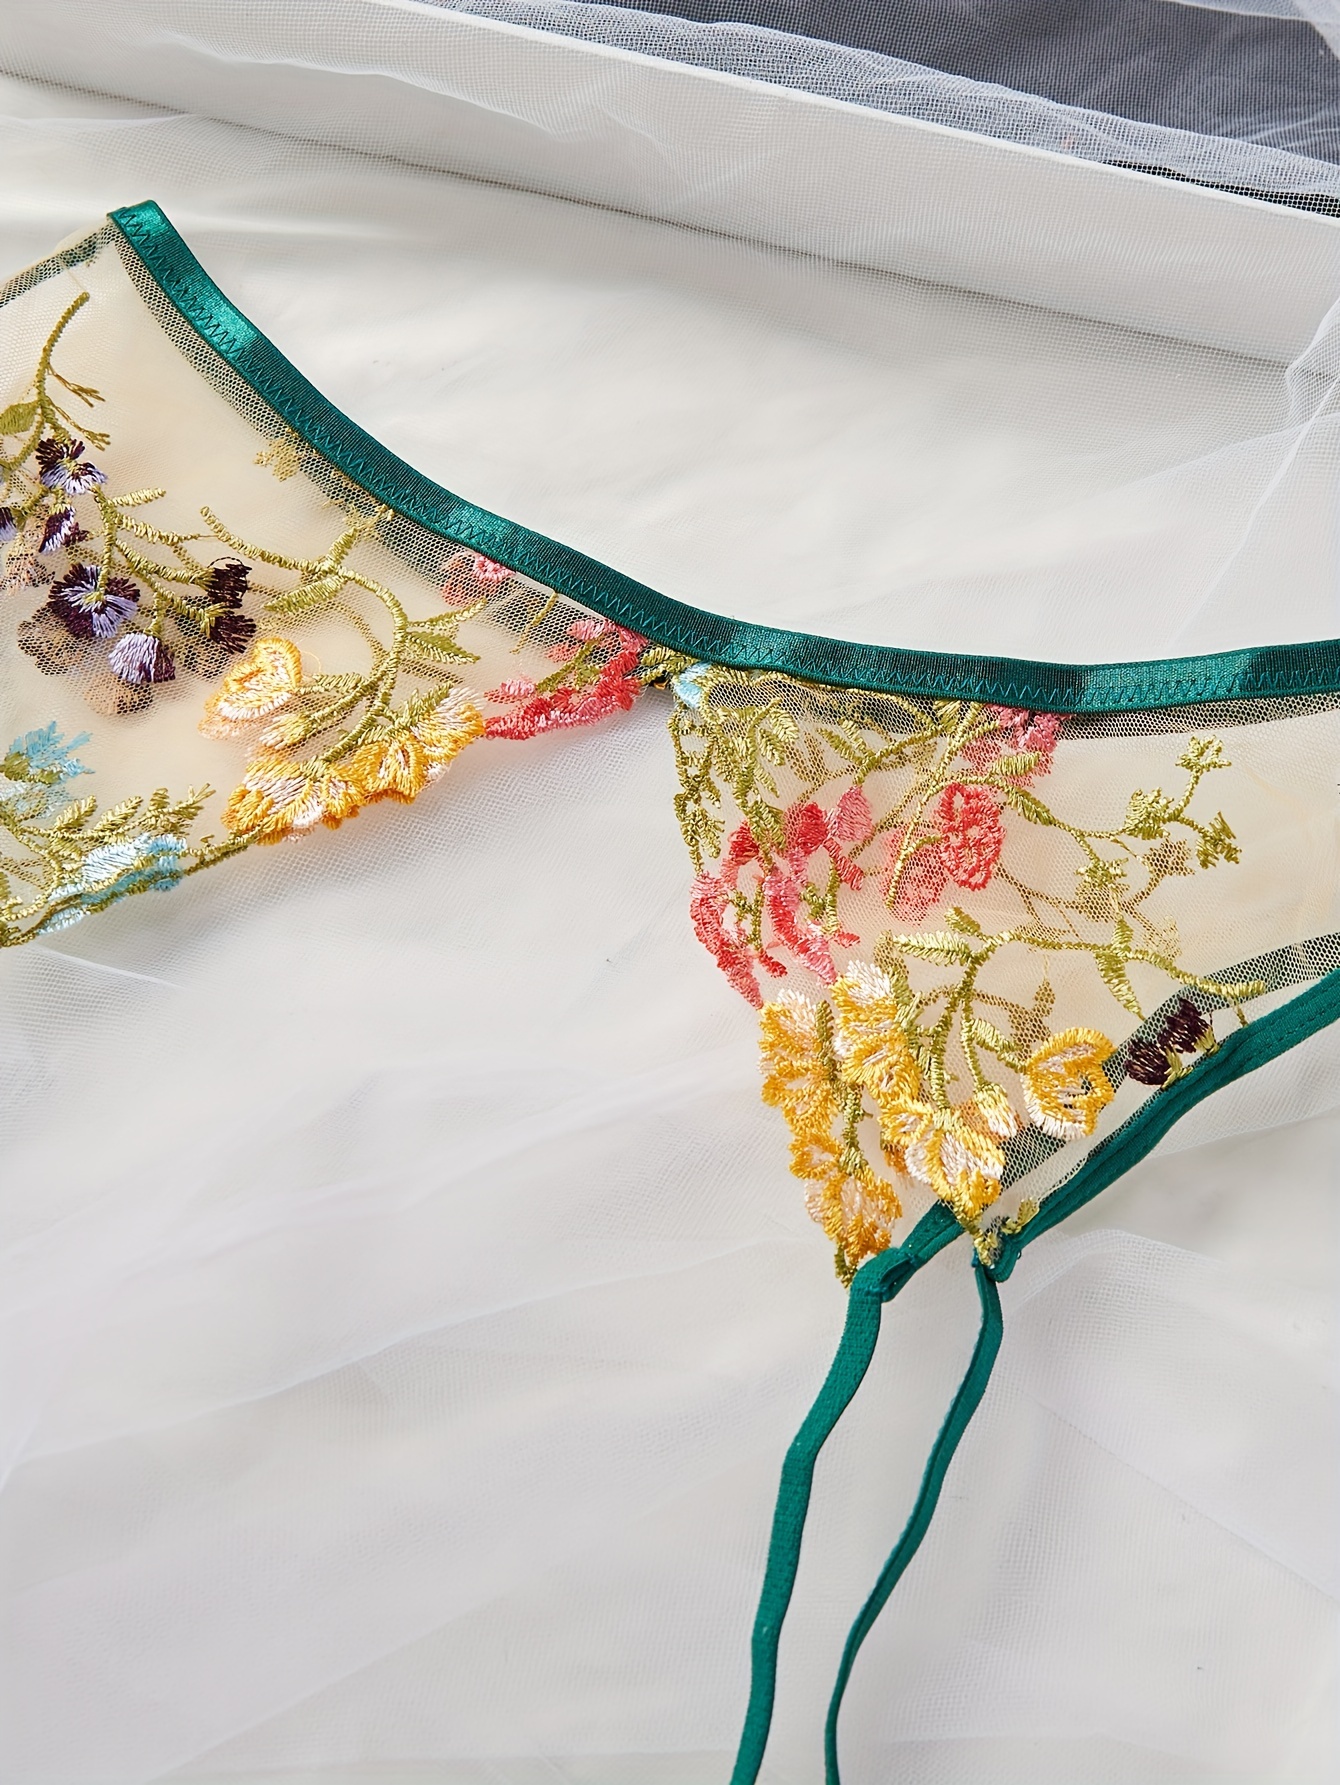 Women Sexy Lace Floral Embroidery Underwear Tie Dyed Mesh Bra See